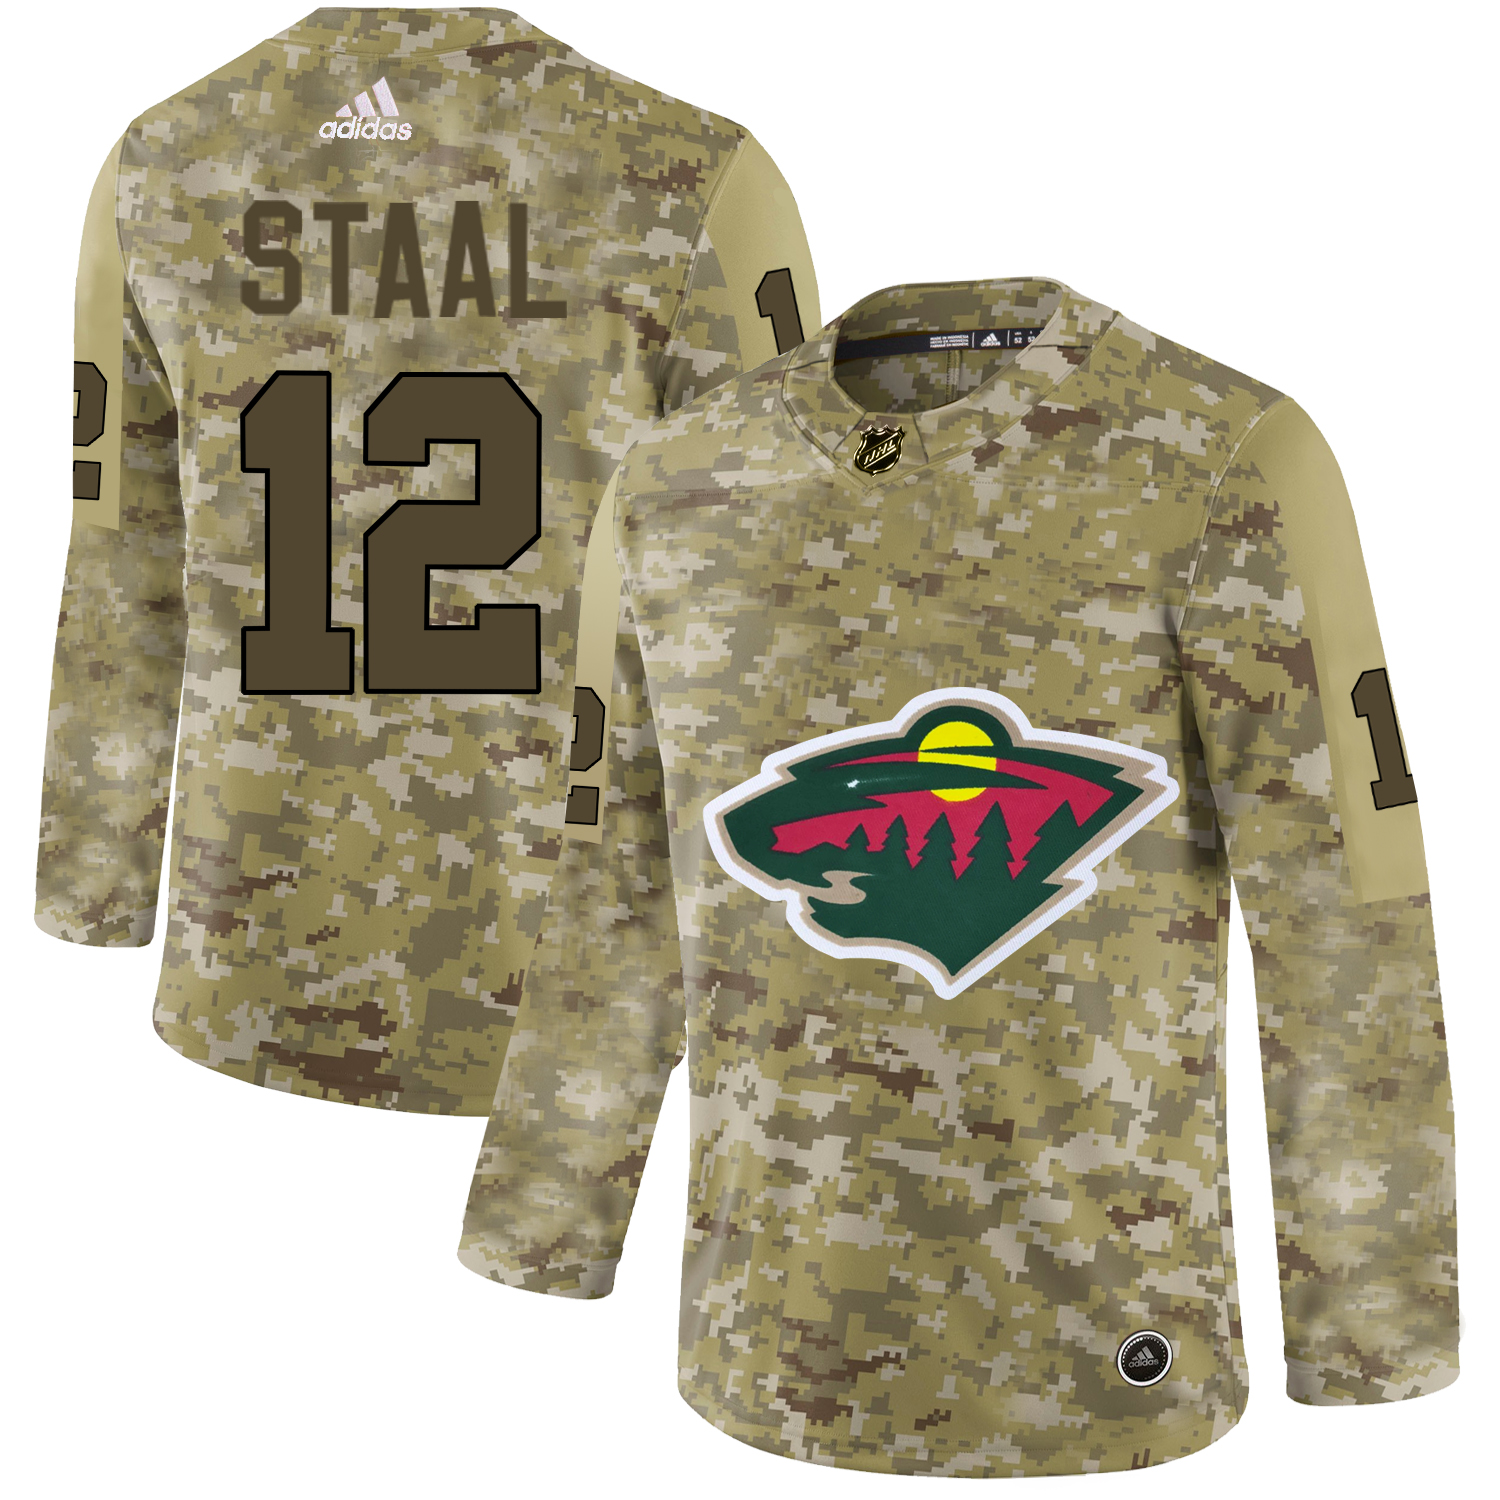 Adidas Wild #12 Eric Staal Camo Authentic Stitched NHL Jersey